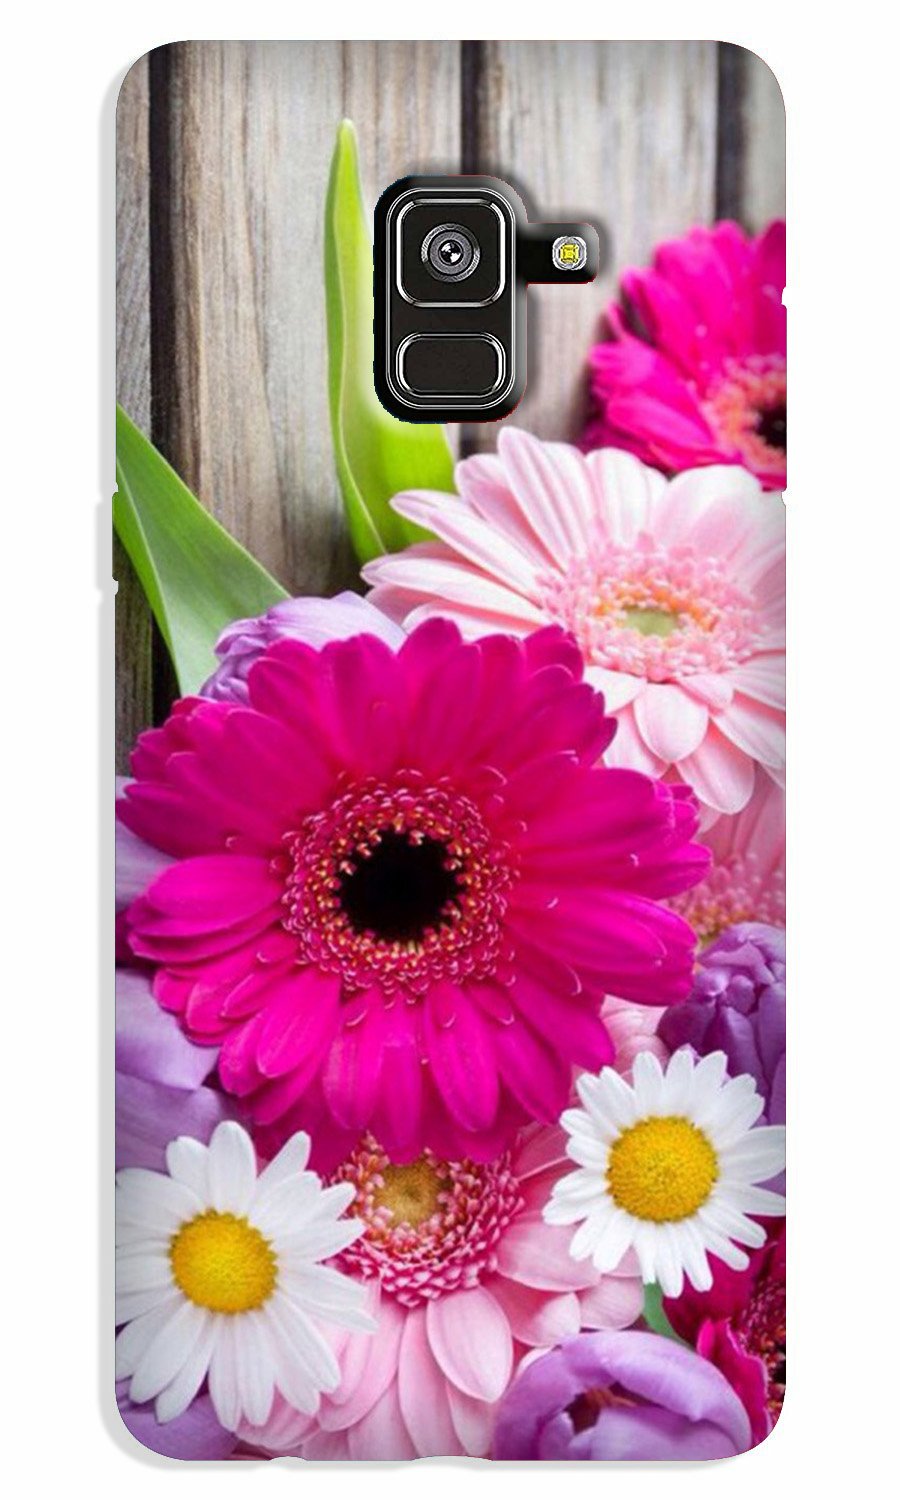 Coloful Daisy2 Case for Galaxy J6 / On6